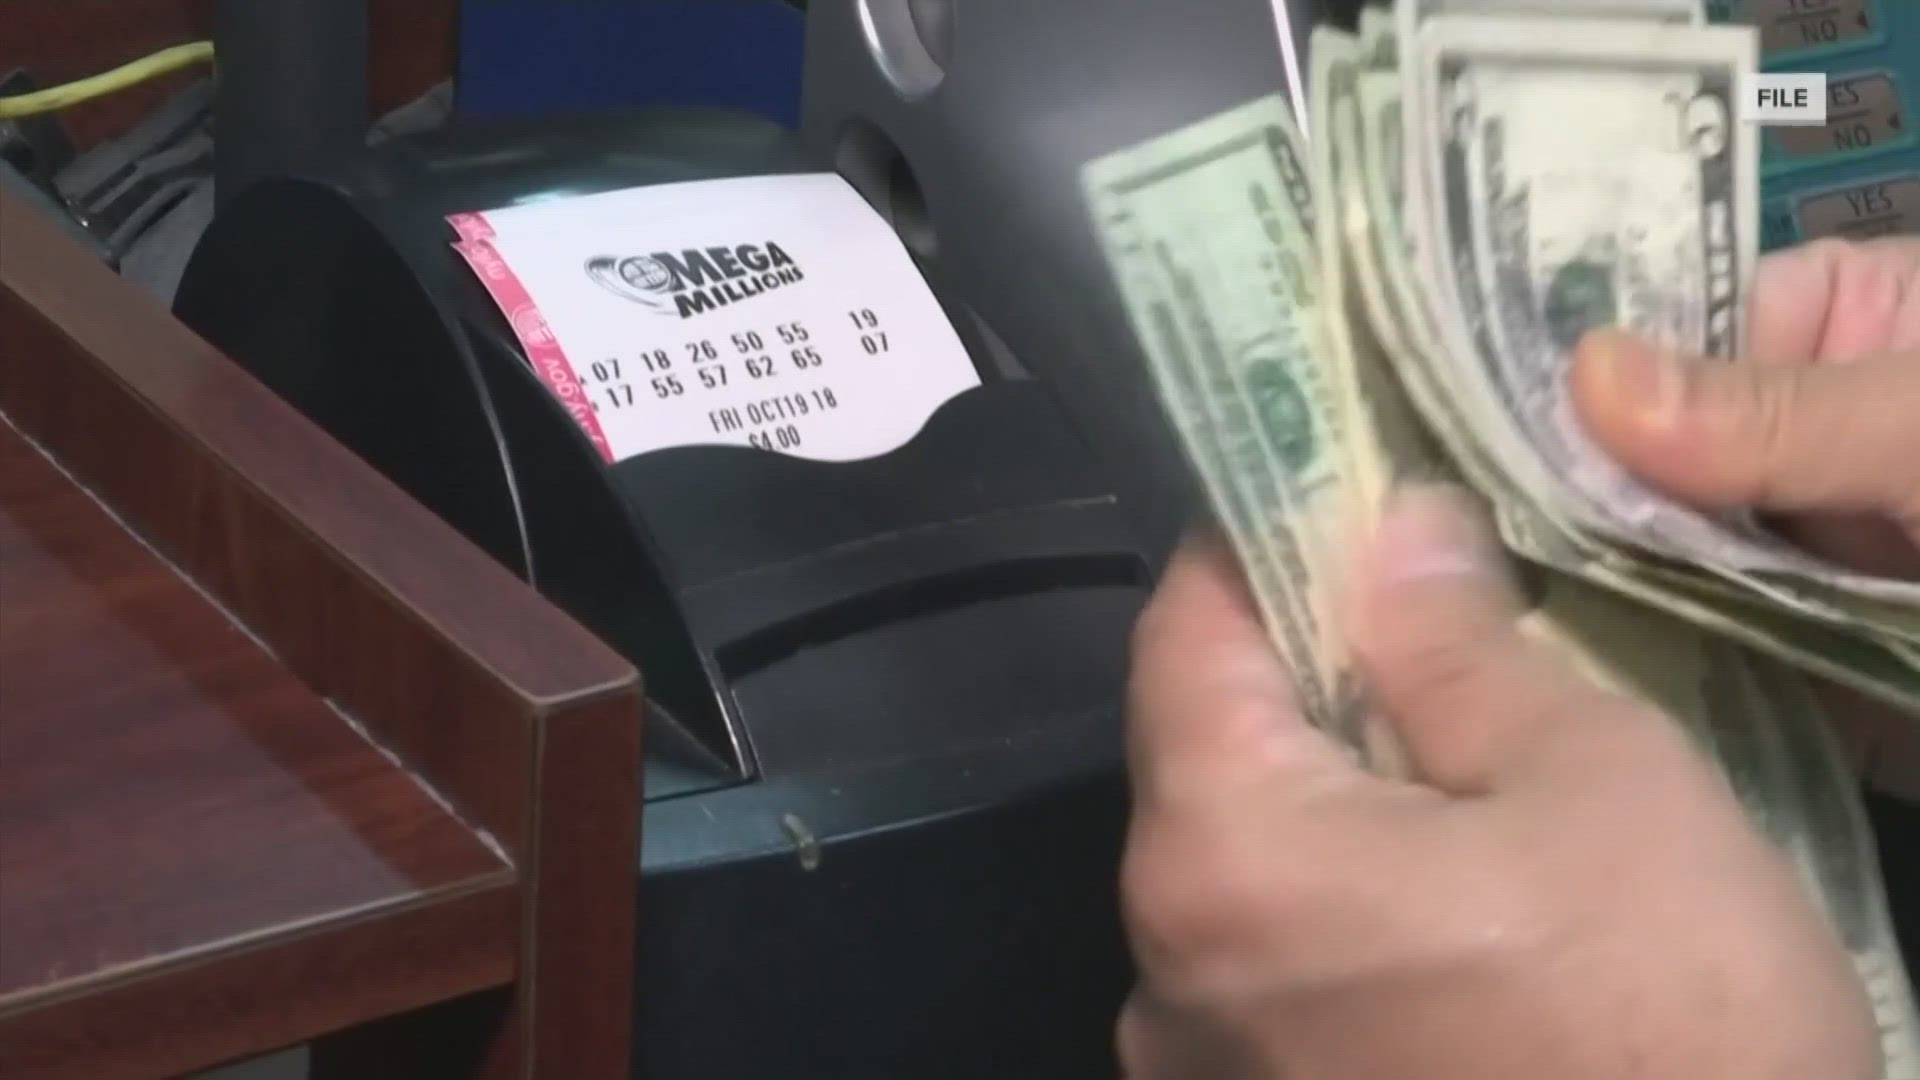 Since nobody hit the jackpot, the top prize Mega Millions prize now climbs to $394 million.